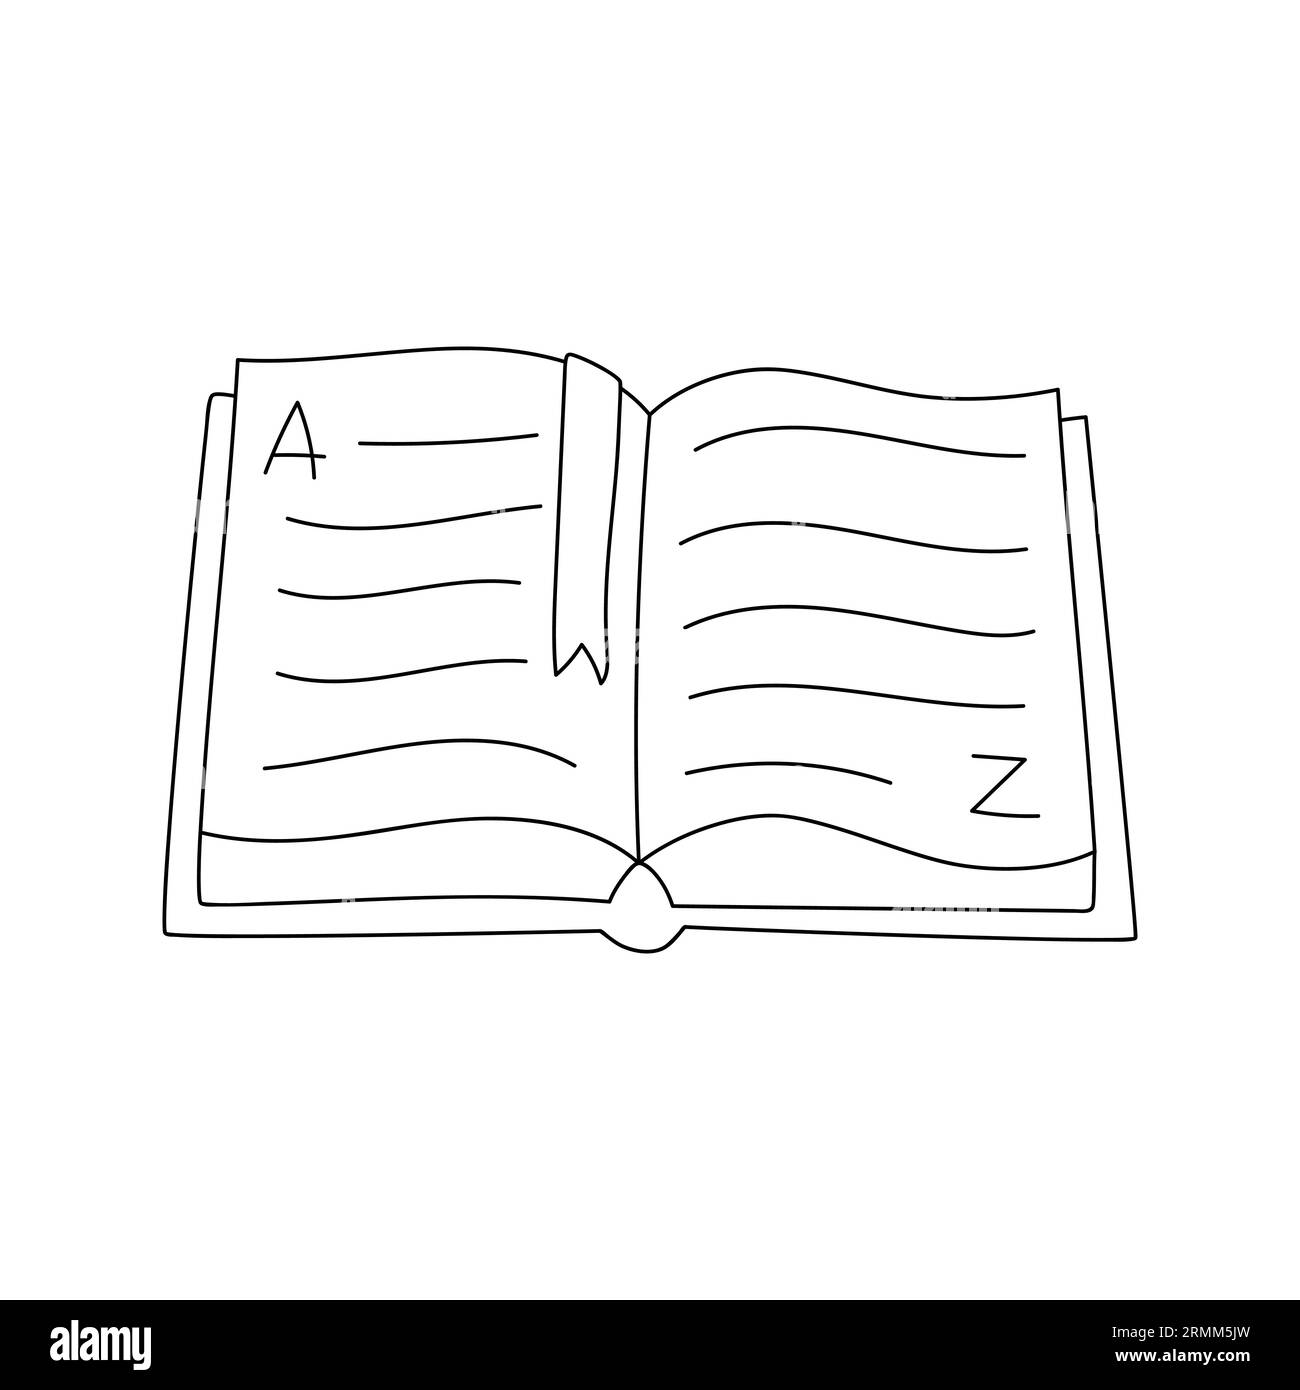 Outline open book lying on the table. Hand drawn dictionary with the letters A and Z. A textbook with a bookmark. Black and white doodle vector illust Stock Vector